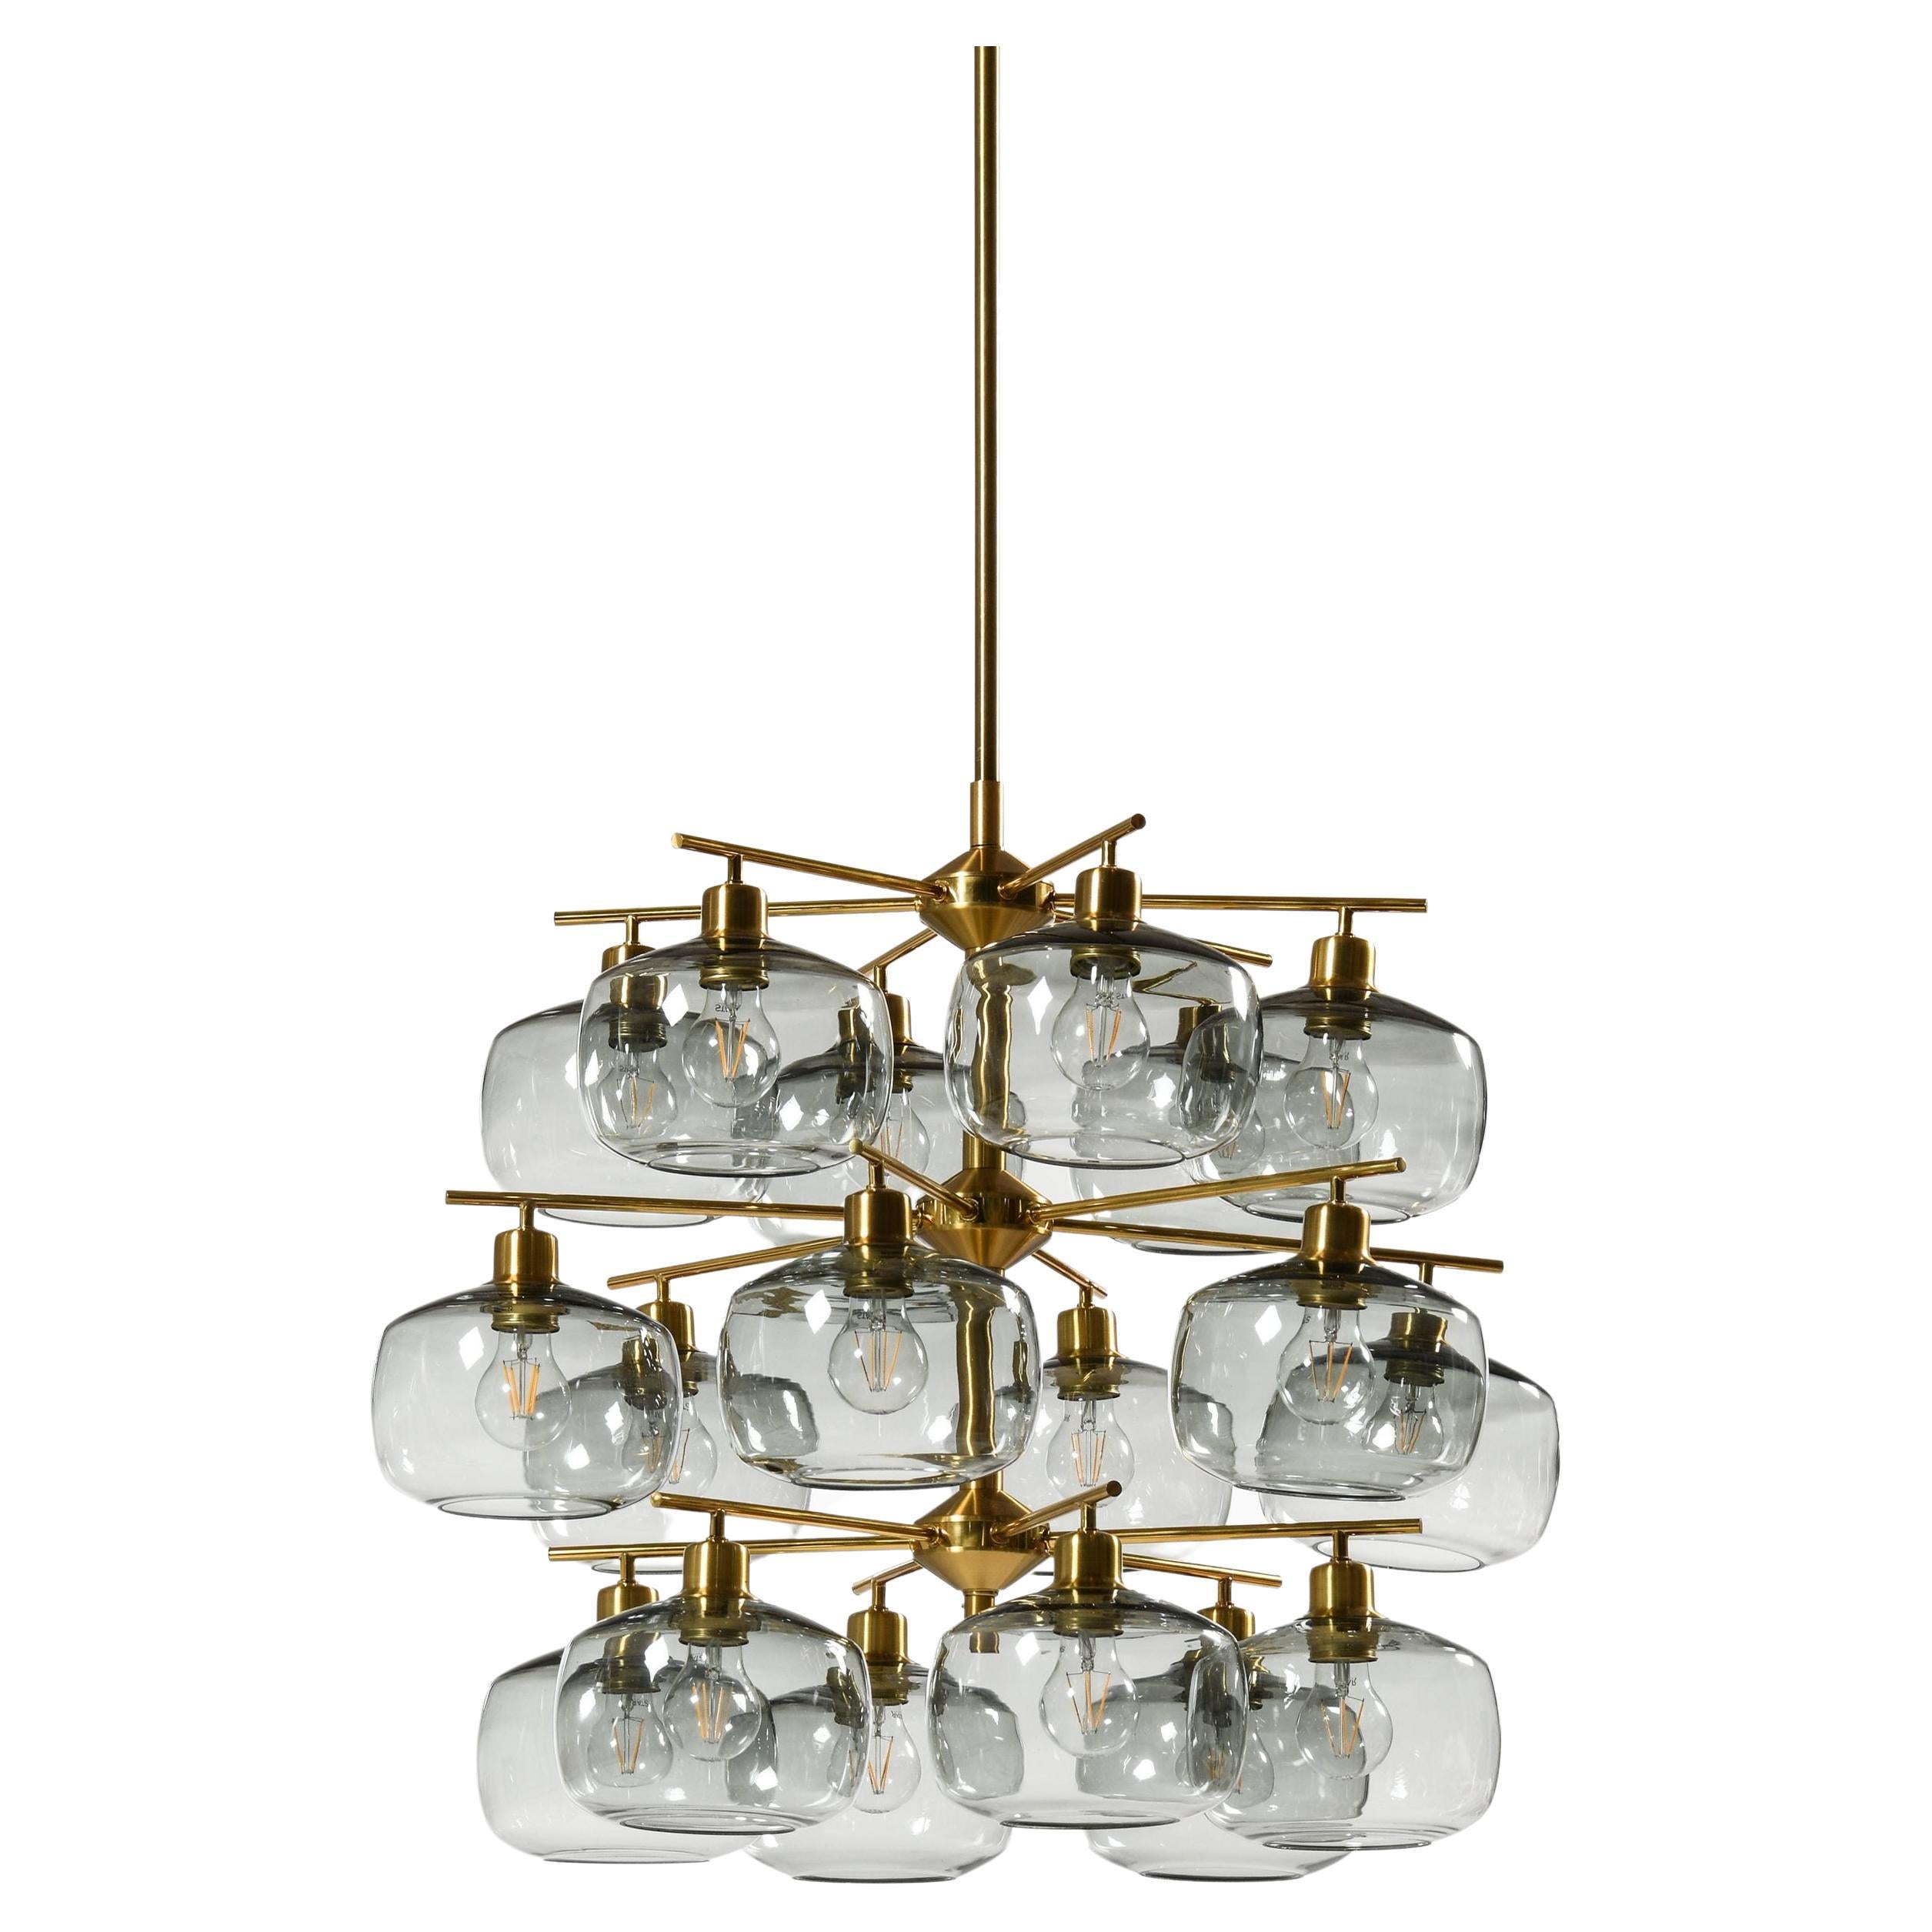 Large Ceiling Lamp in Brass and Glass by Holger Johansson, 1952 For Sale